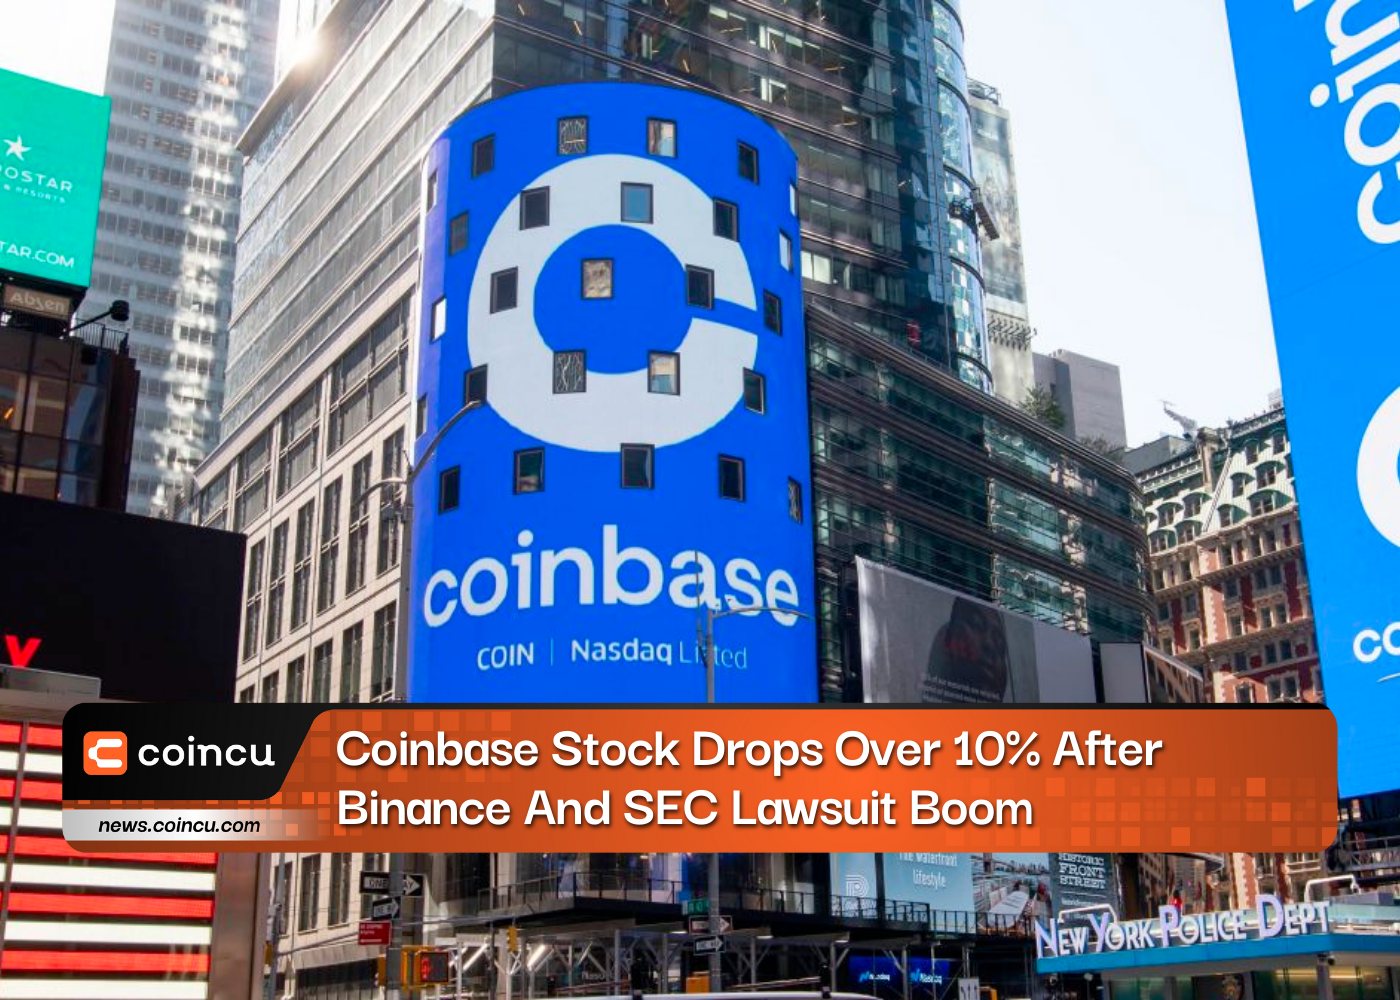 Coinbase Stock Drops Over 10% After Binance And SEC Lawsuit Boom